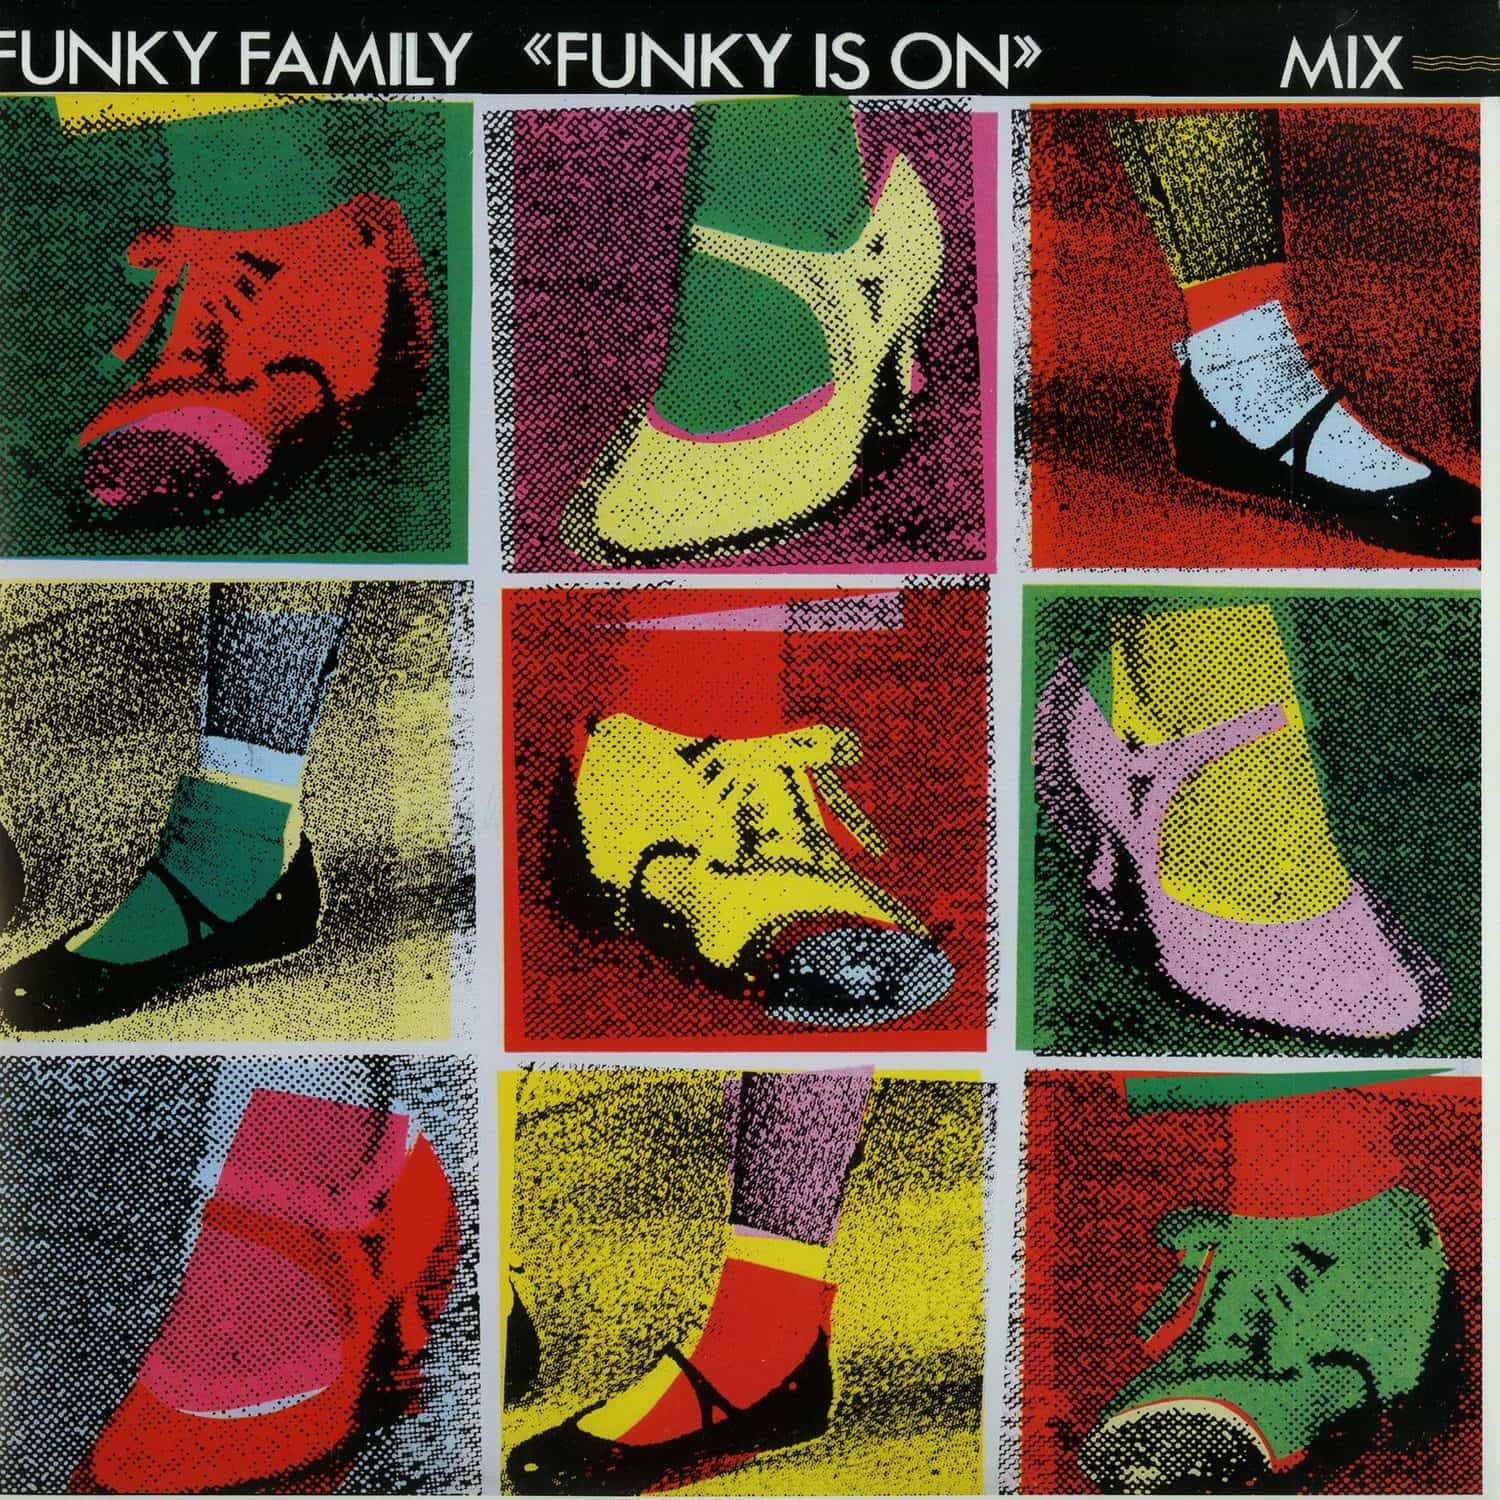 Funky Family - FUNKY IS ON